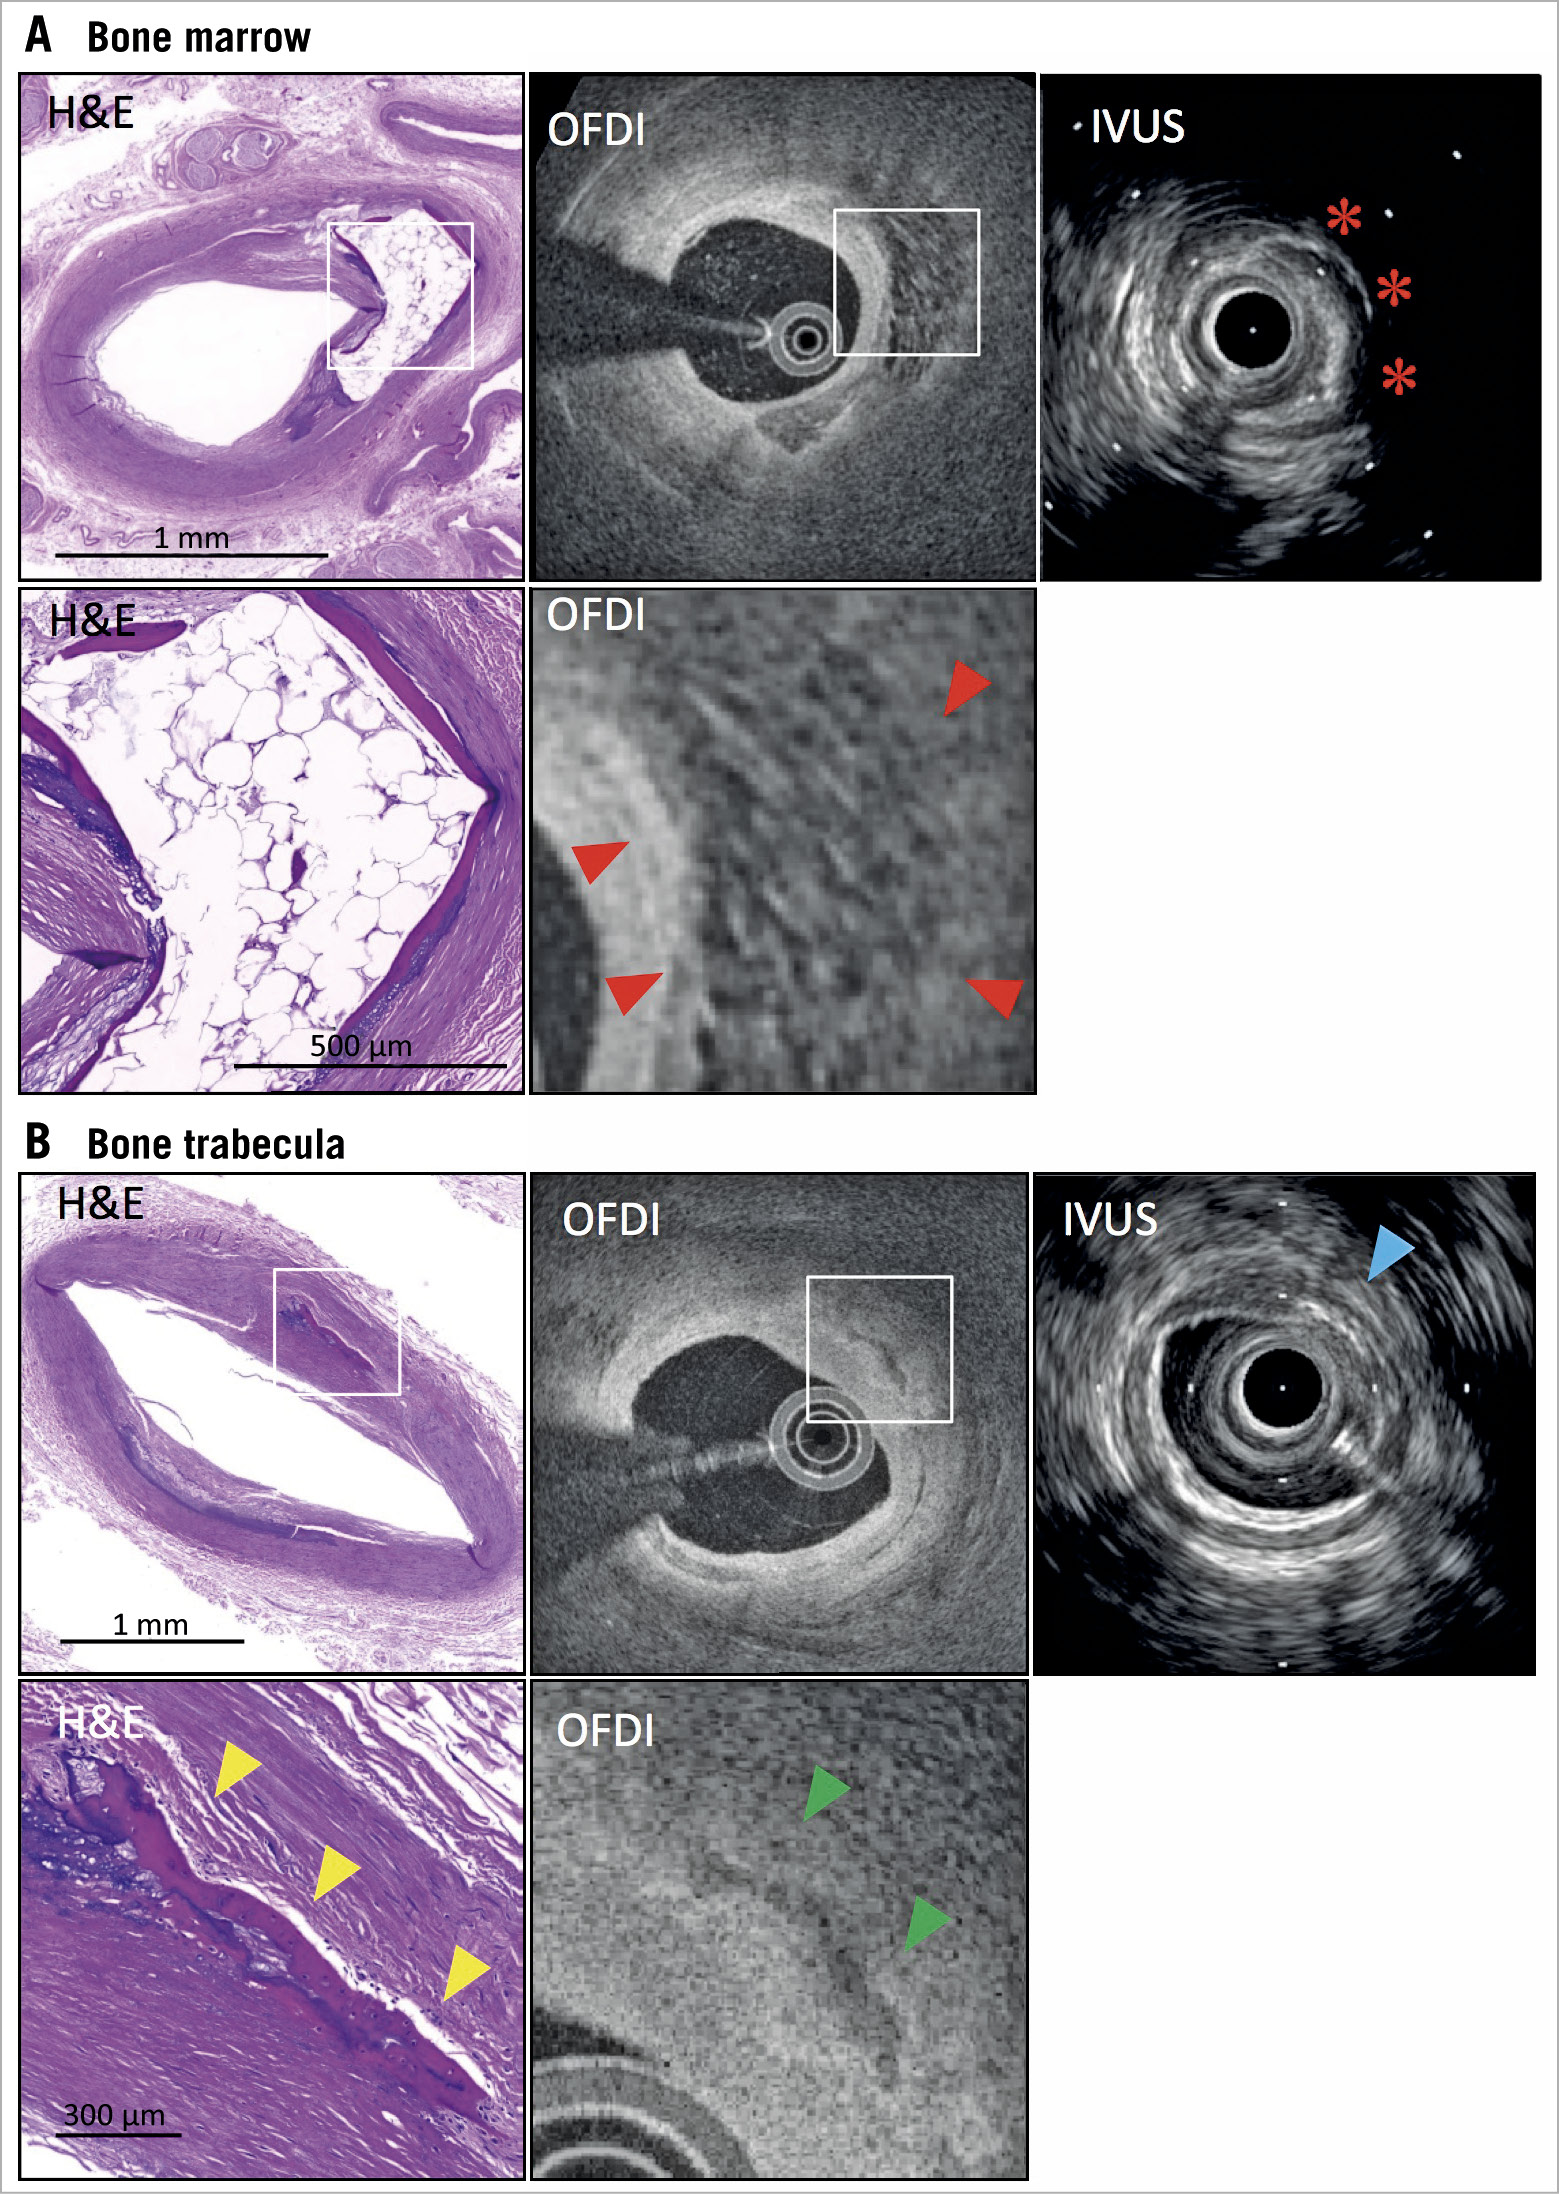 Figure 3. Findings of bone formation by IVUS and OFDI co-registered with histology. A) Histological image shows bone formation in the intima. High-power image shows thin trabecular bone at the edges of the bone marrow. OFDI shows honeycomb sign, indicating bone marrow best appreciated on high-power images (red arrowheads). IVUS shows high echoic signal with strong acoustic shadow (red asterisks). Lower panels show high-power images from white boxes in upper histological and OFDI panels. B) Histological image shows trabecular bone (yellow arrowheads) without bone marrow. OFDI shows irregular calcification (green arrowheads). IVUS shows high echoic sign (blue arrow) in intima-media border. Lower panels show high-power images from white boxes in upper histological and OFDI panels. IVUS: intravascular ultrasound; OFDI: optical frequency domain imaging